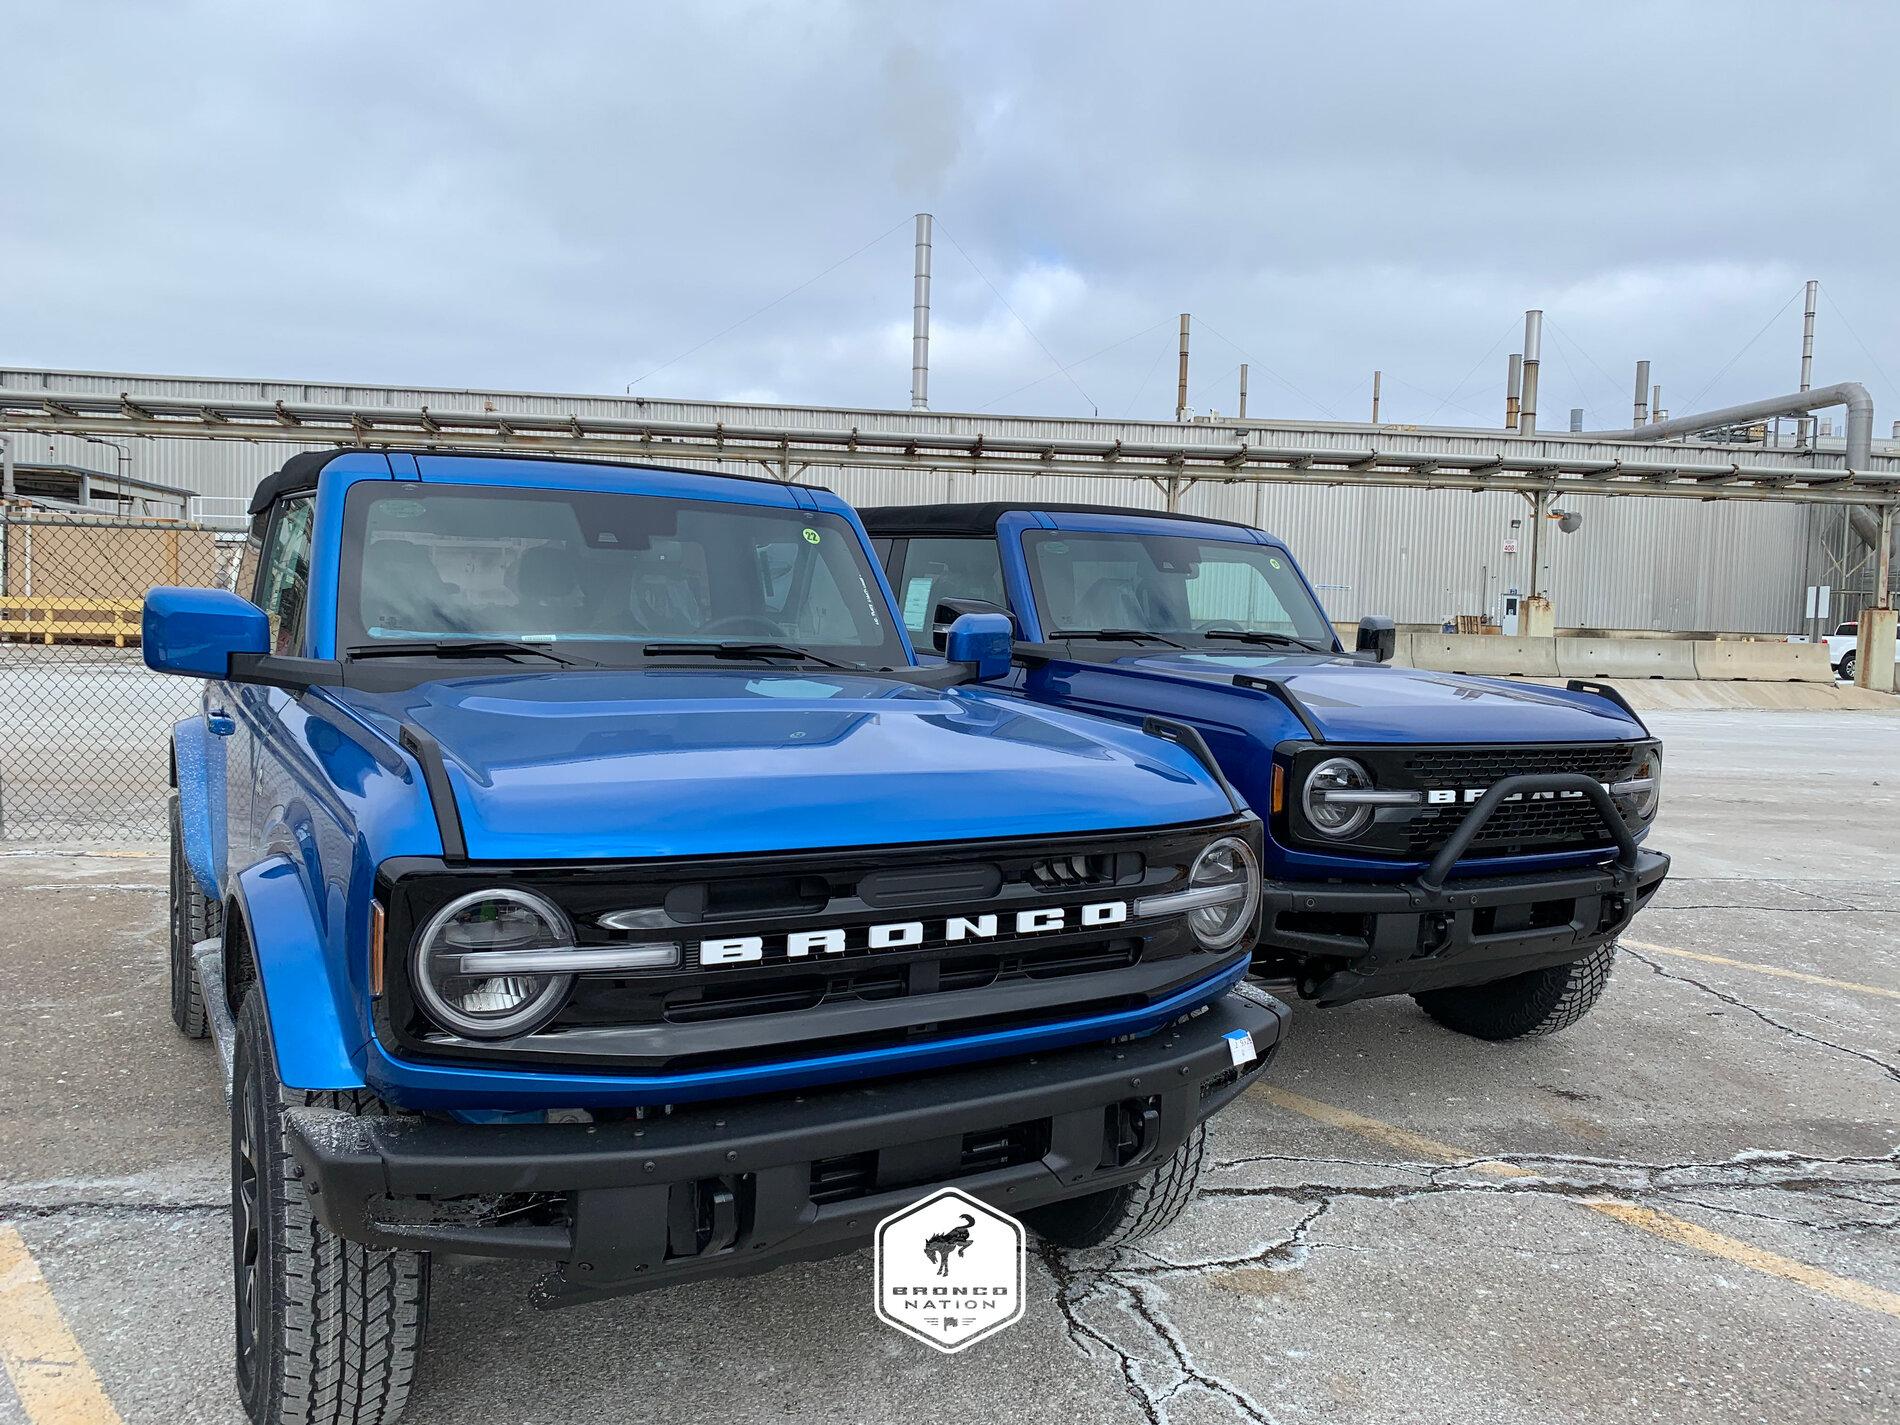 Ford Bronco Toyota Cavalry Blue and Area 51 Compared Side by Side 123FFBBD-61B9-430C-B28C-8A37EC5D3FA9